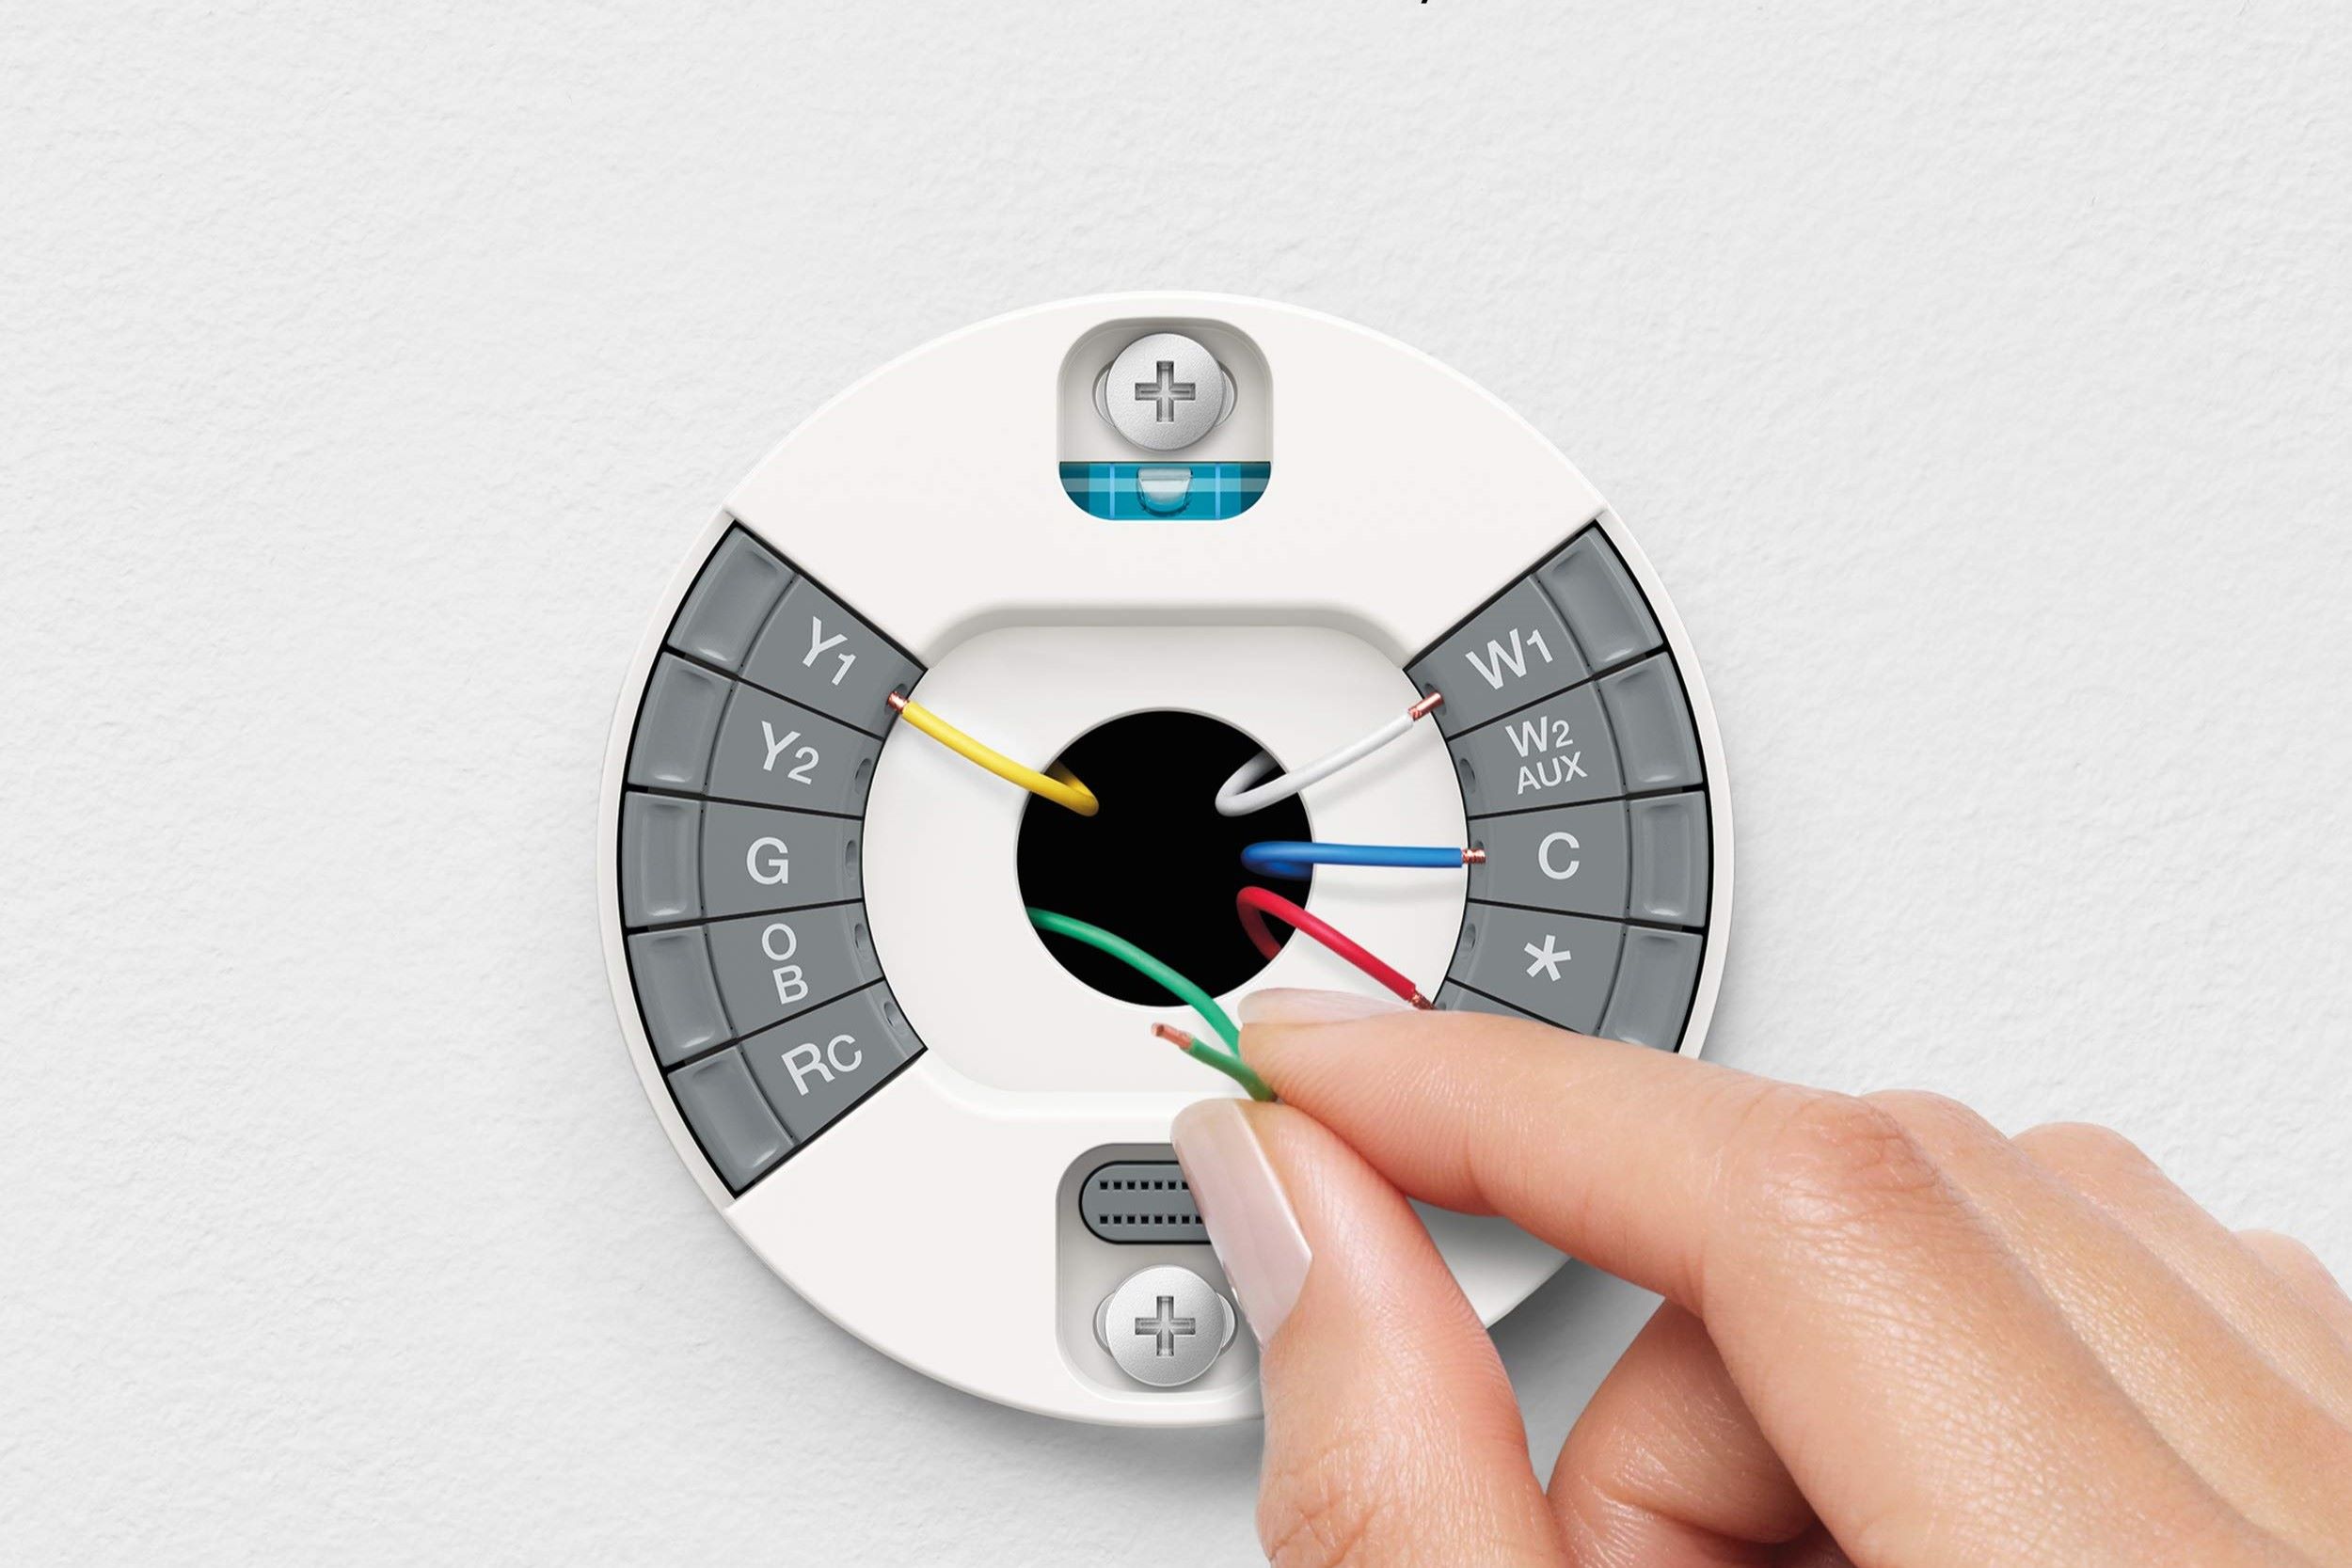 Who Can Install Nest Thermostat